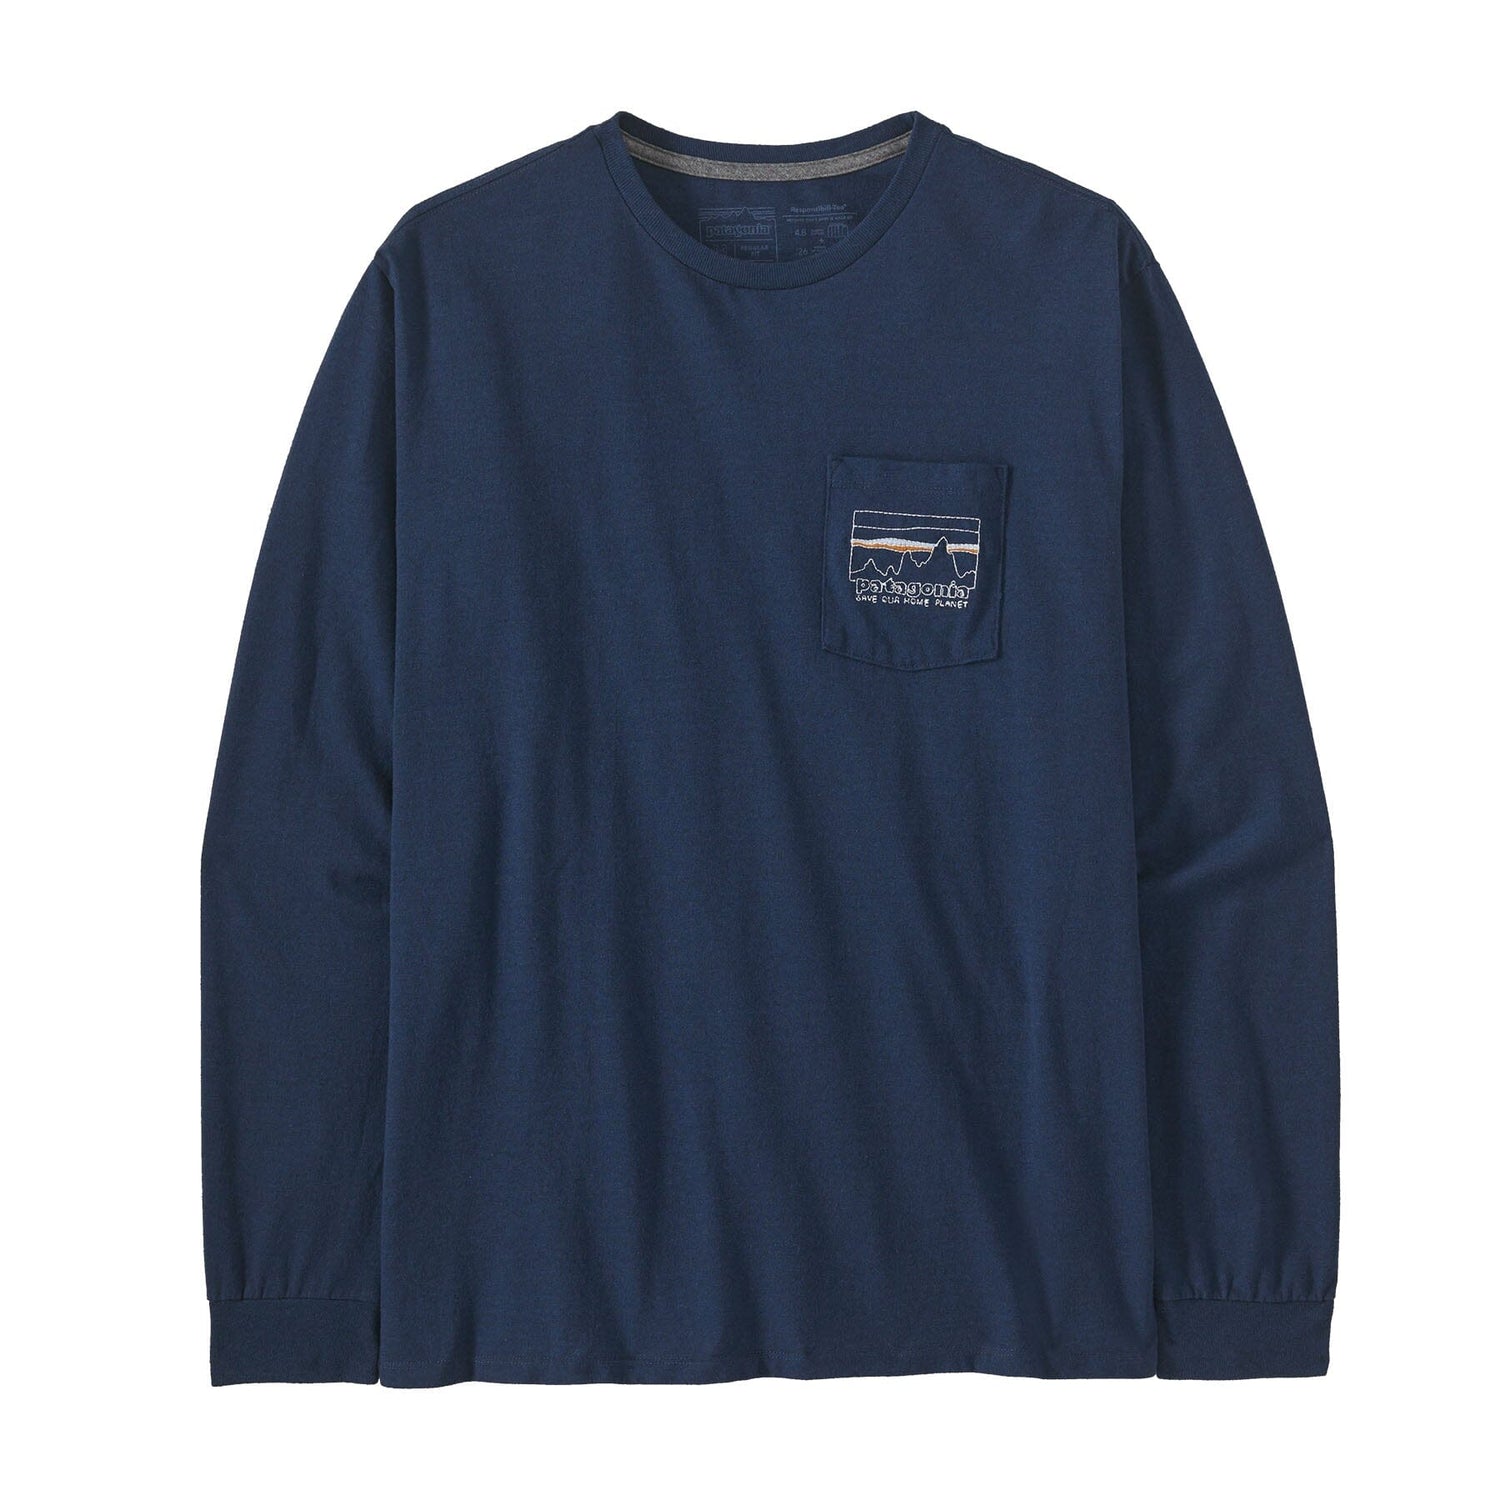 Patagonia - M's L/S '73 Skyline Pocket Responsibili-Tee - Recycled Cotton & Recycled PET - Weekendbee - sustainable sportswear